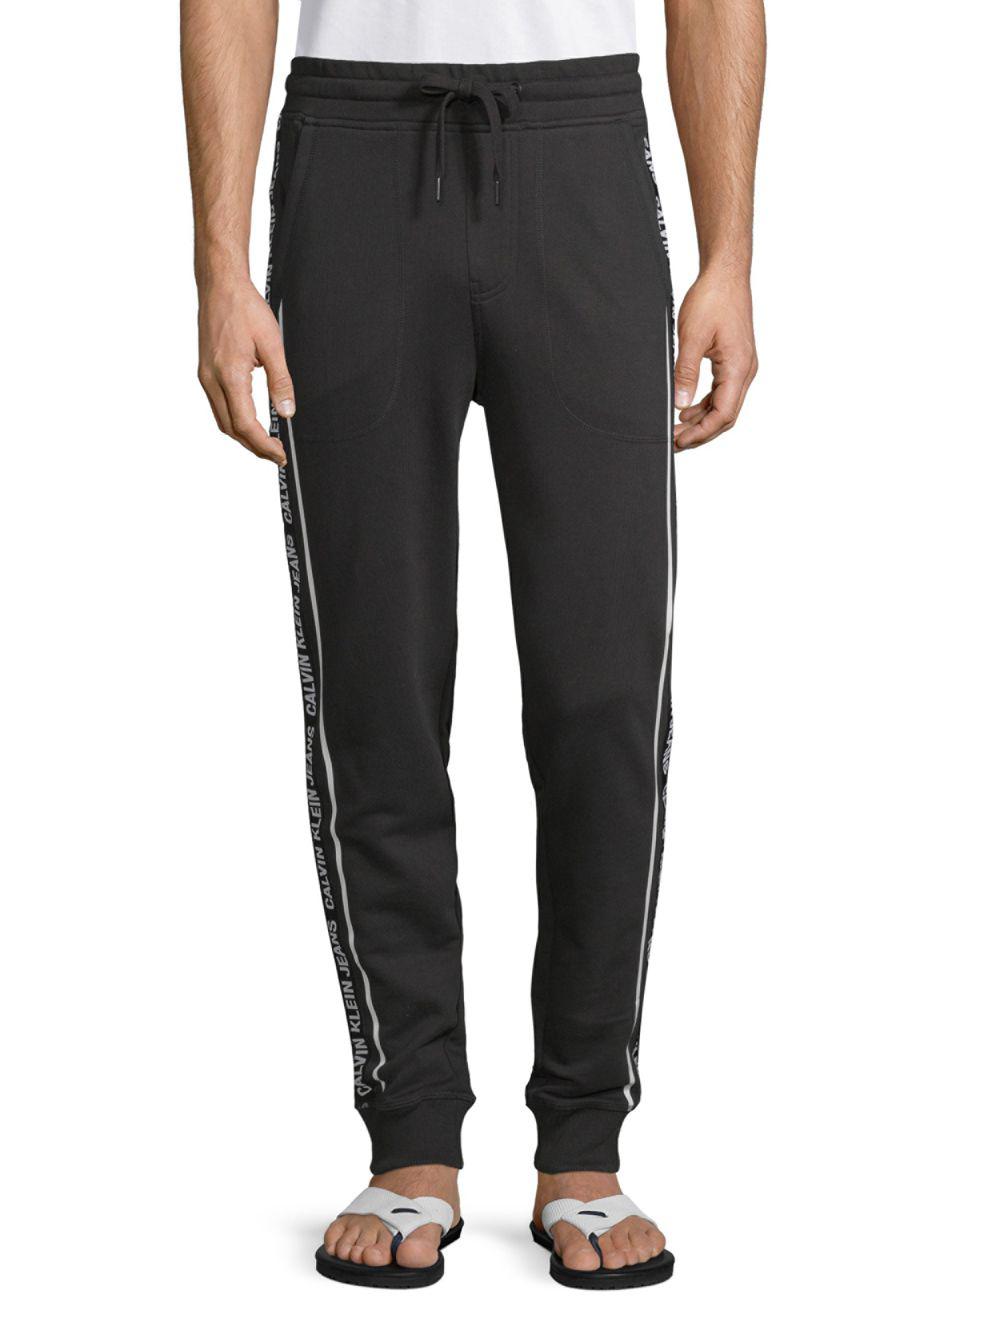 Buy Calvin Klein Joggers online - Men - 54 products | FASHIOLA.in